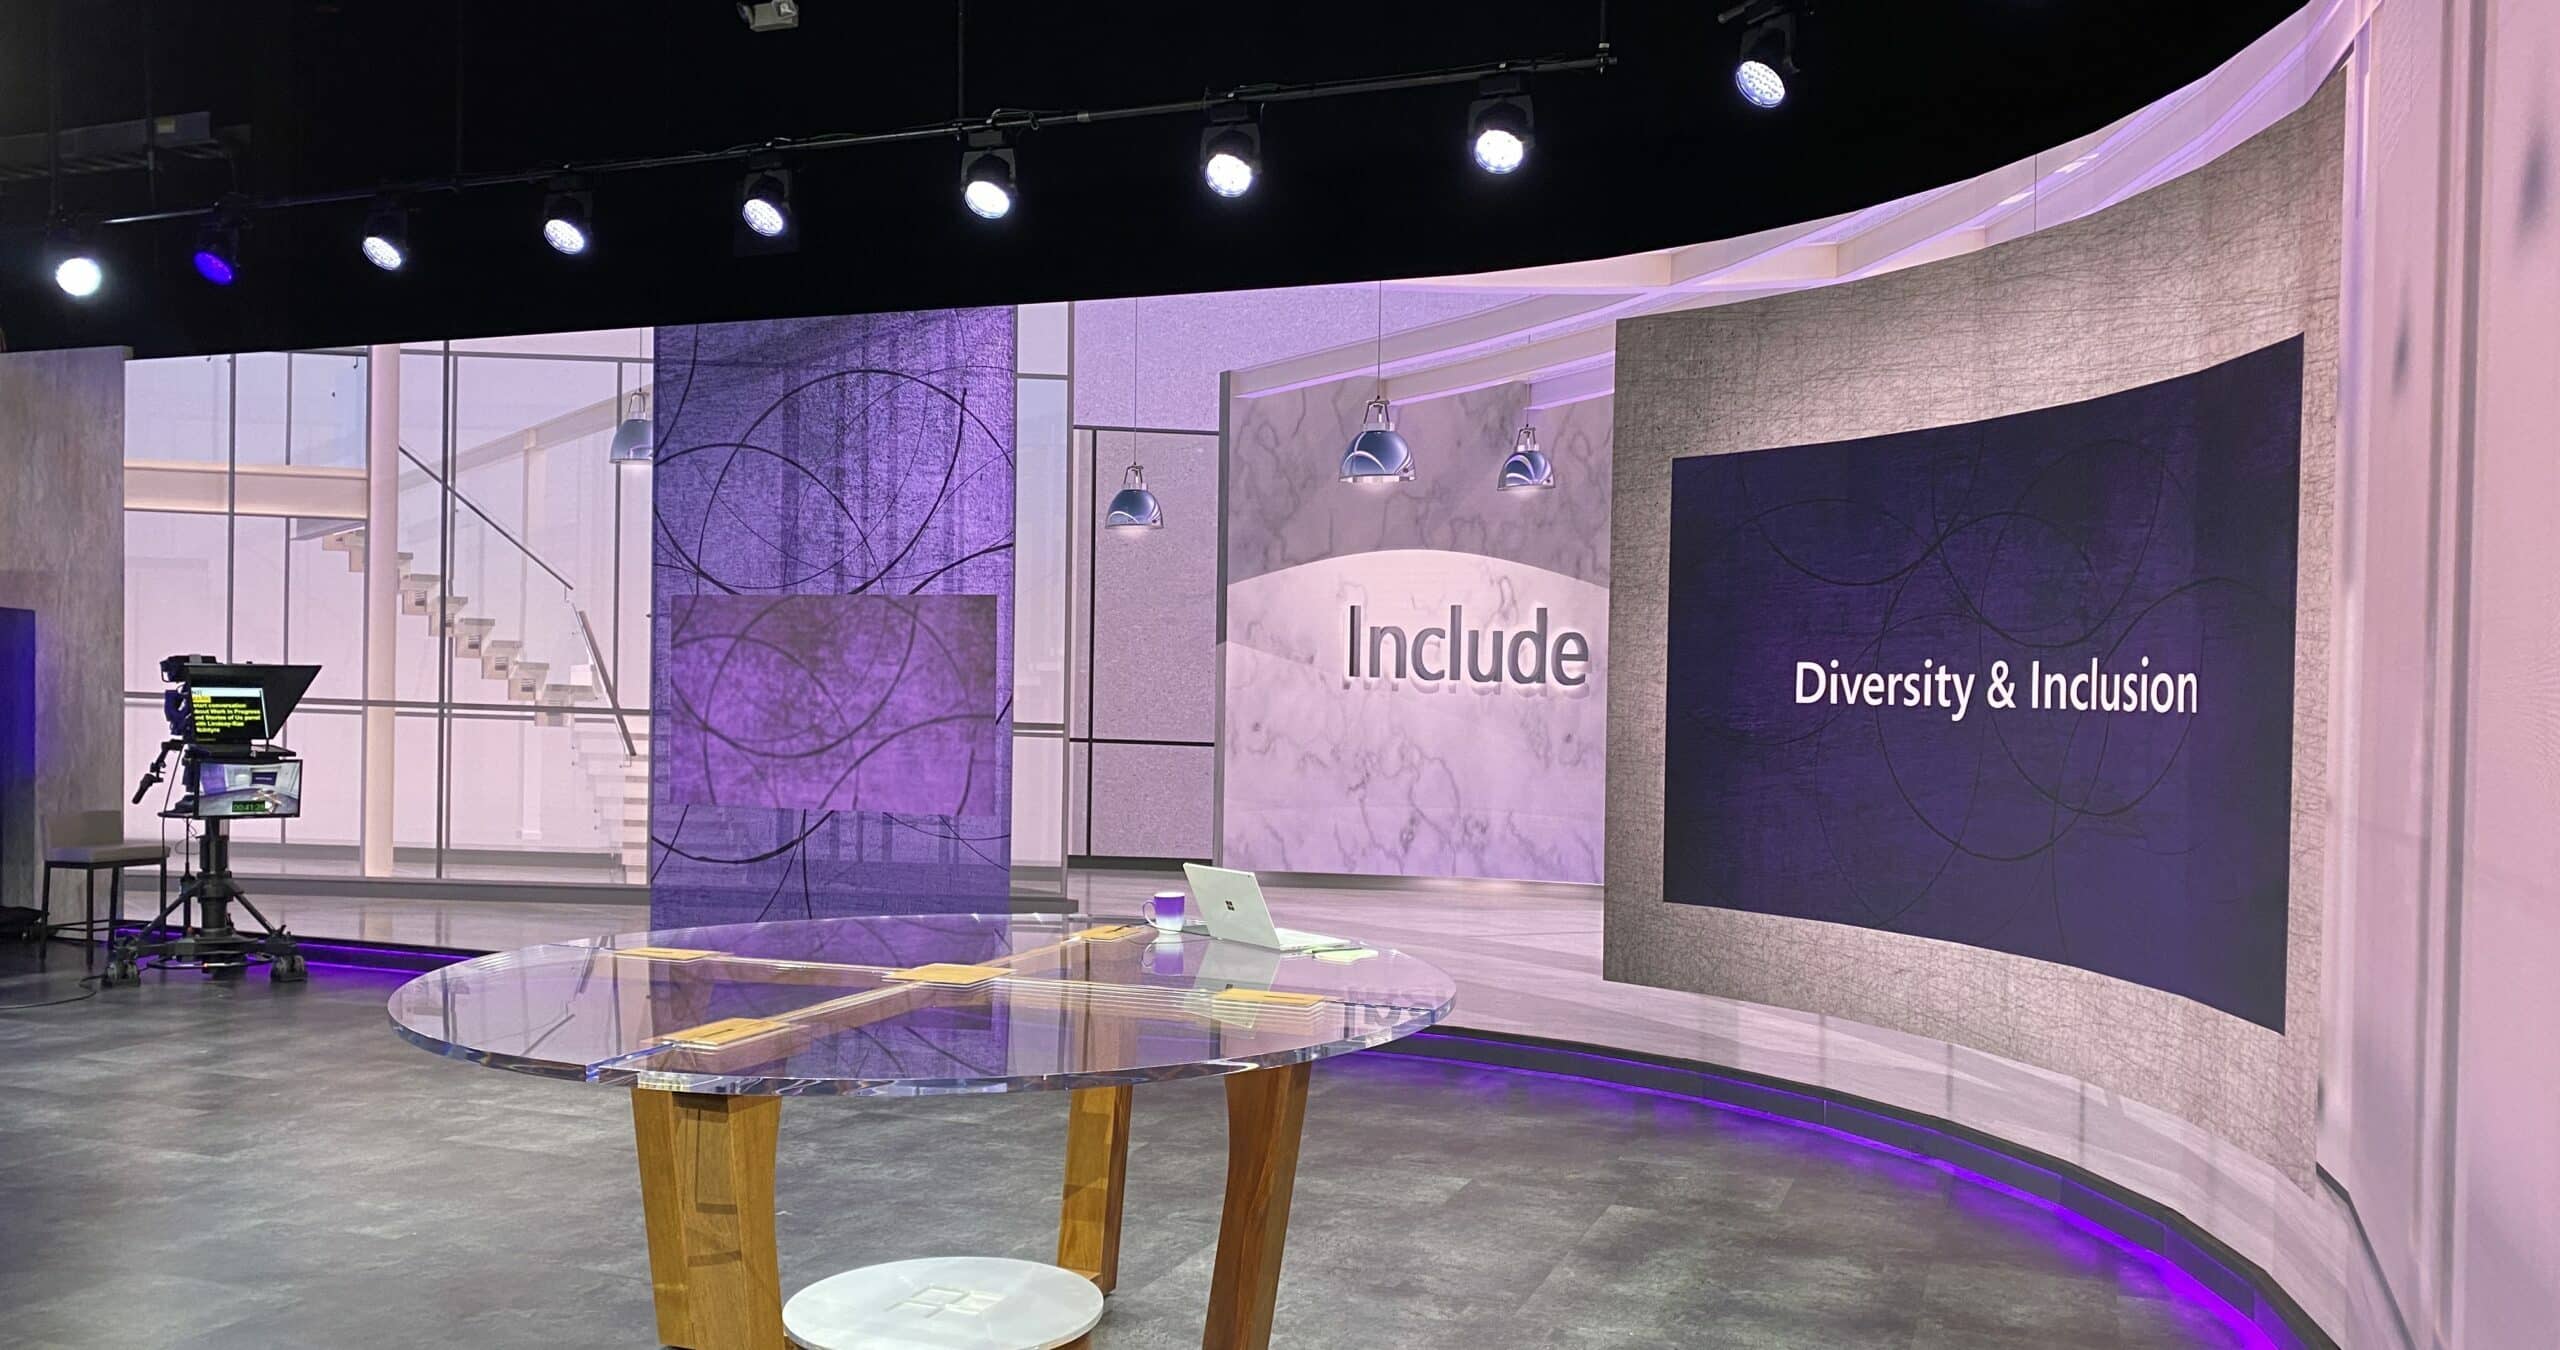 Wide screen LED wall at Stage C at Microsoft, prepared for a discussion about inclusion